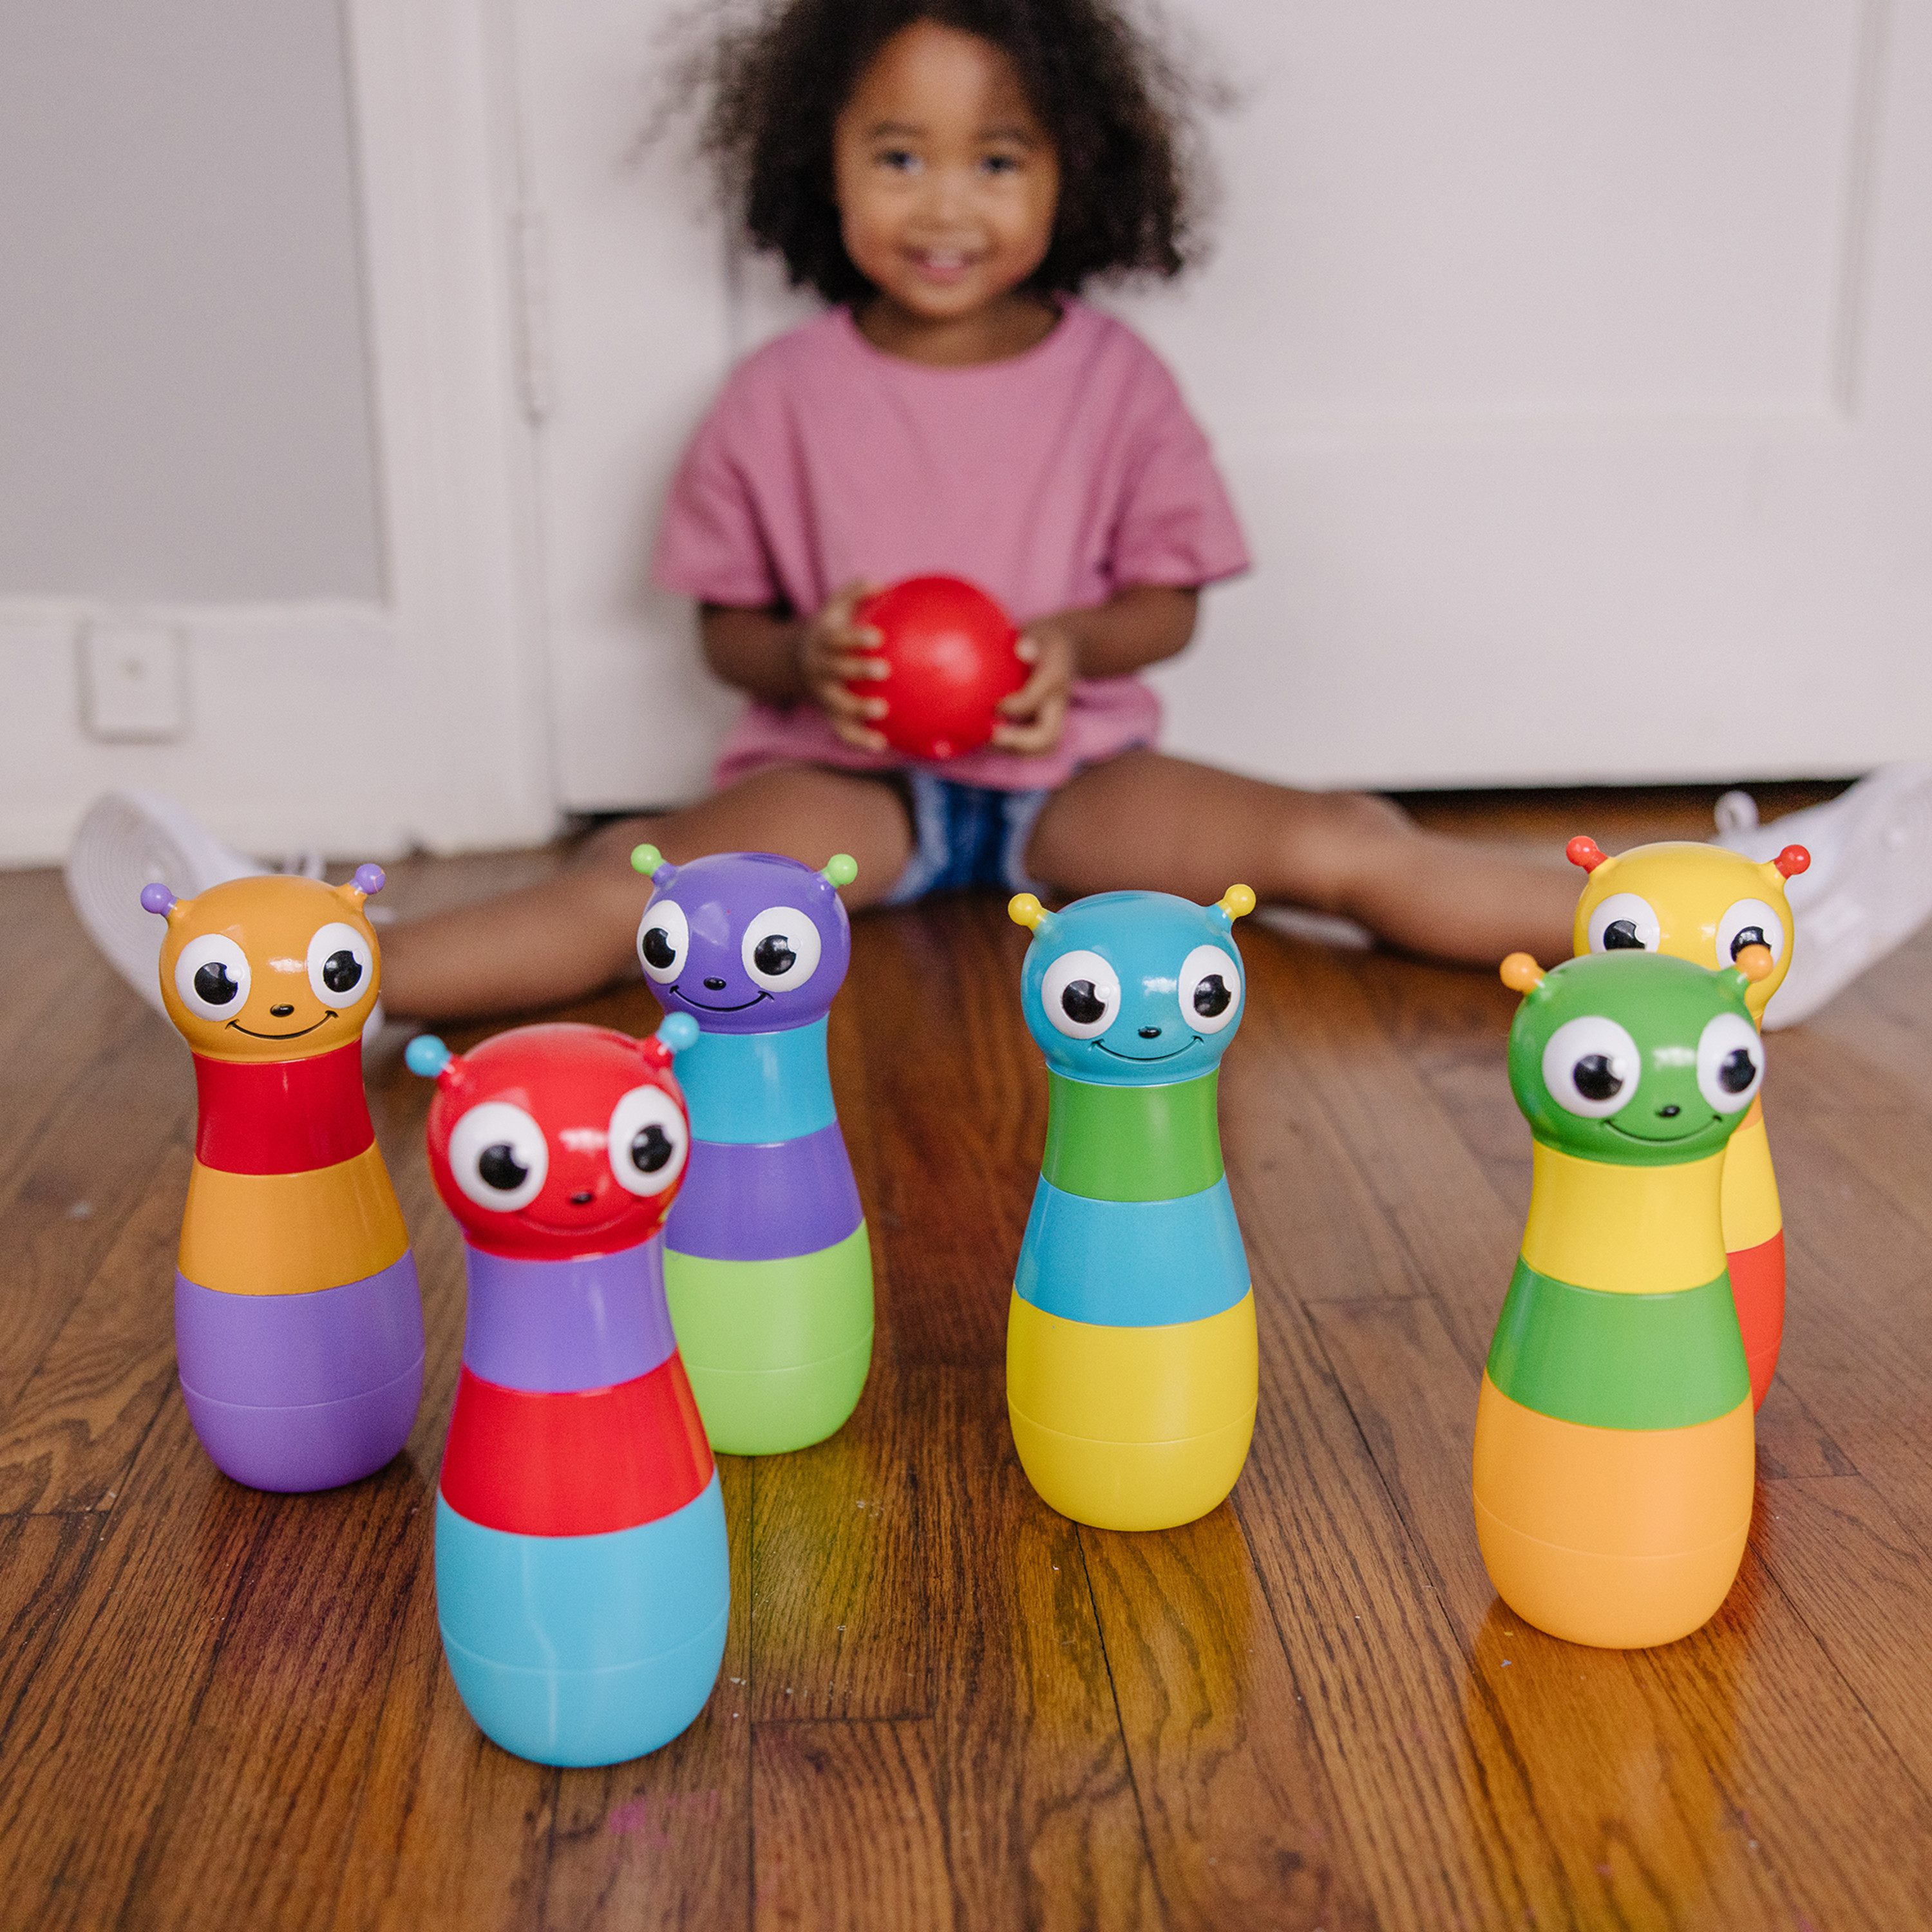 Melissa & Doug Cute as a Bug Bowling Set Kids Indoor Outdoor Game (8 Pcs) - image 2 of 9